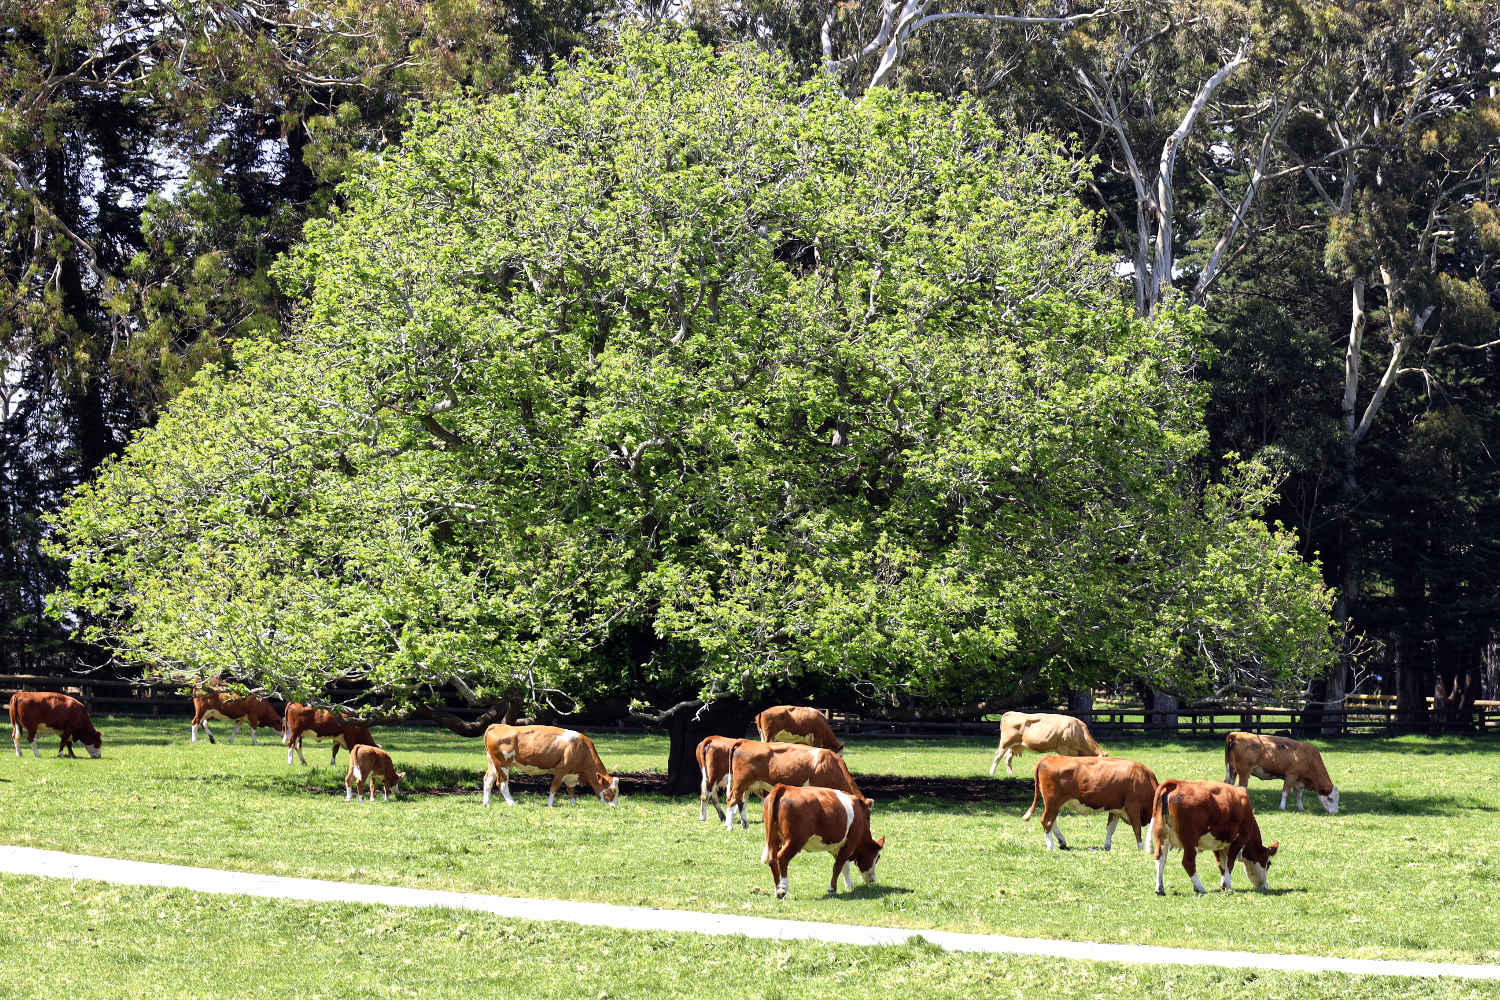 Cornwall Park cows, Auckland New Zealand